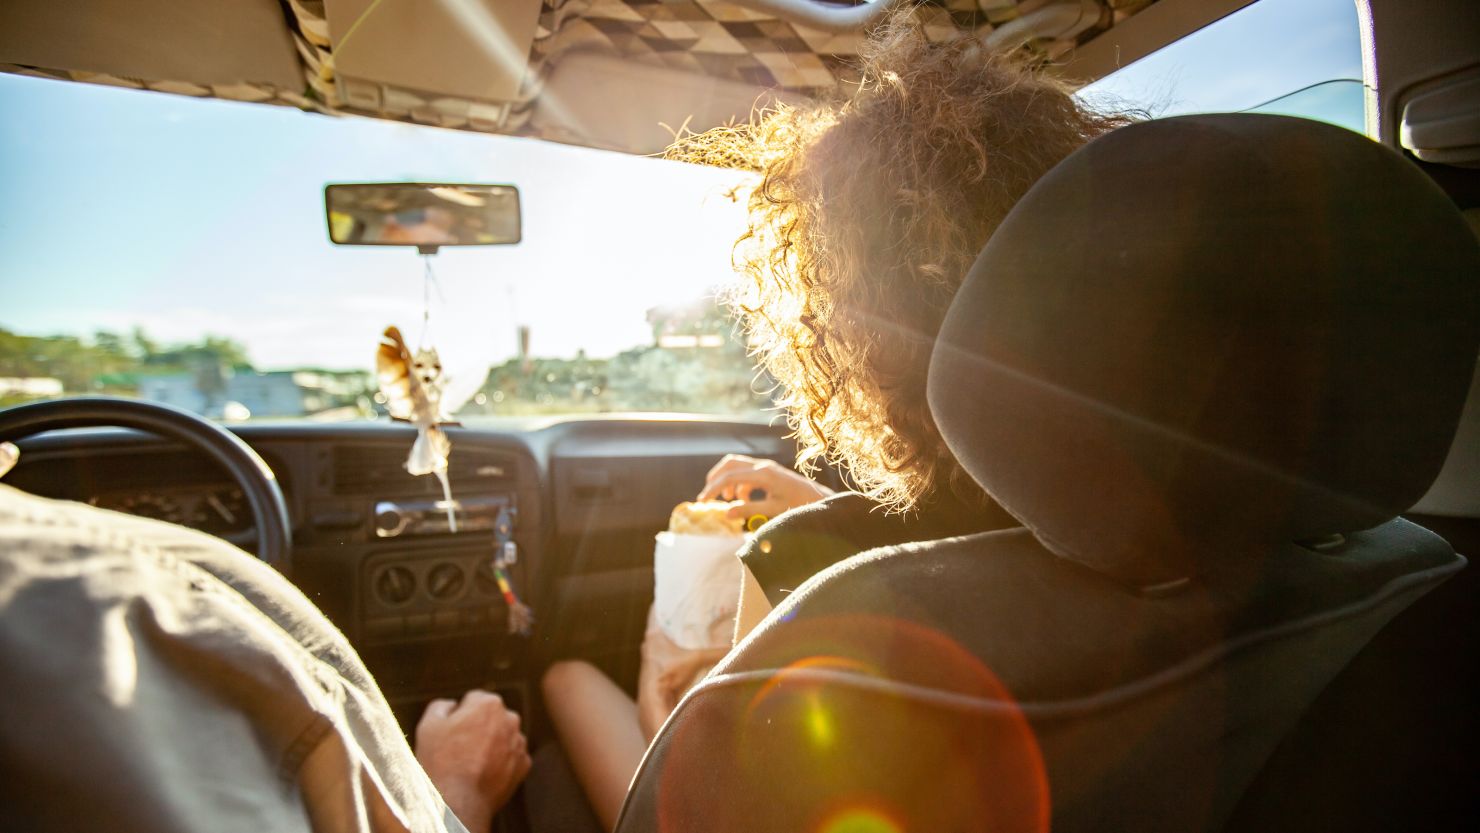 7 Tips to Keep your Car Clean on a Road Trip - Travel Inspired Living